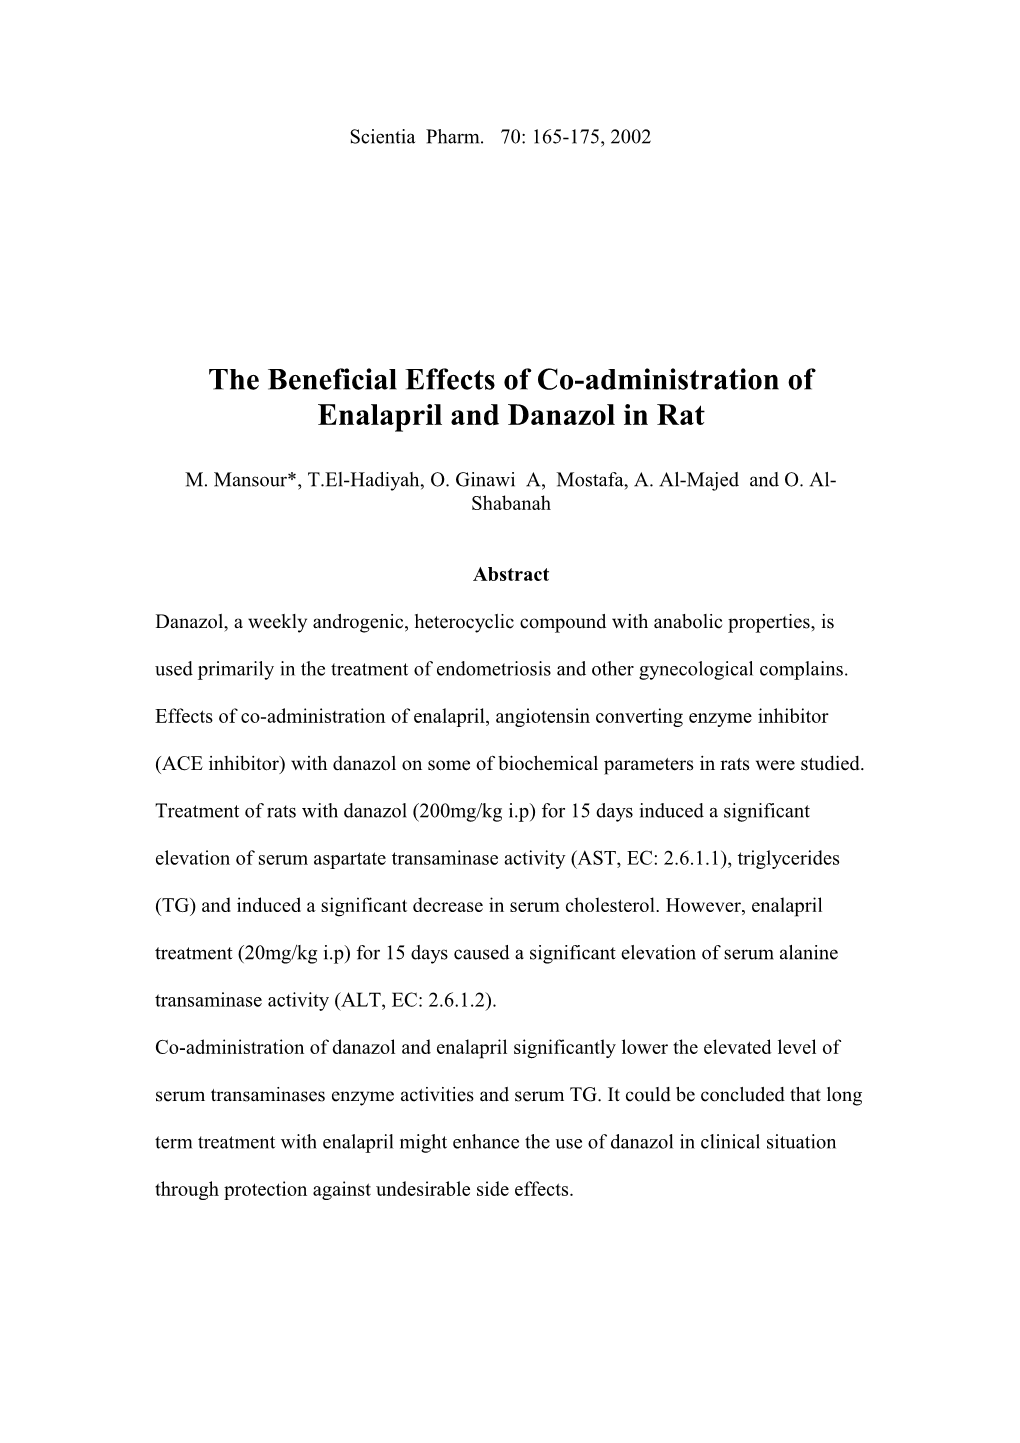 The Beneficial Effects of Co-Administration of Enalapril and Danazol in Rat